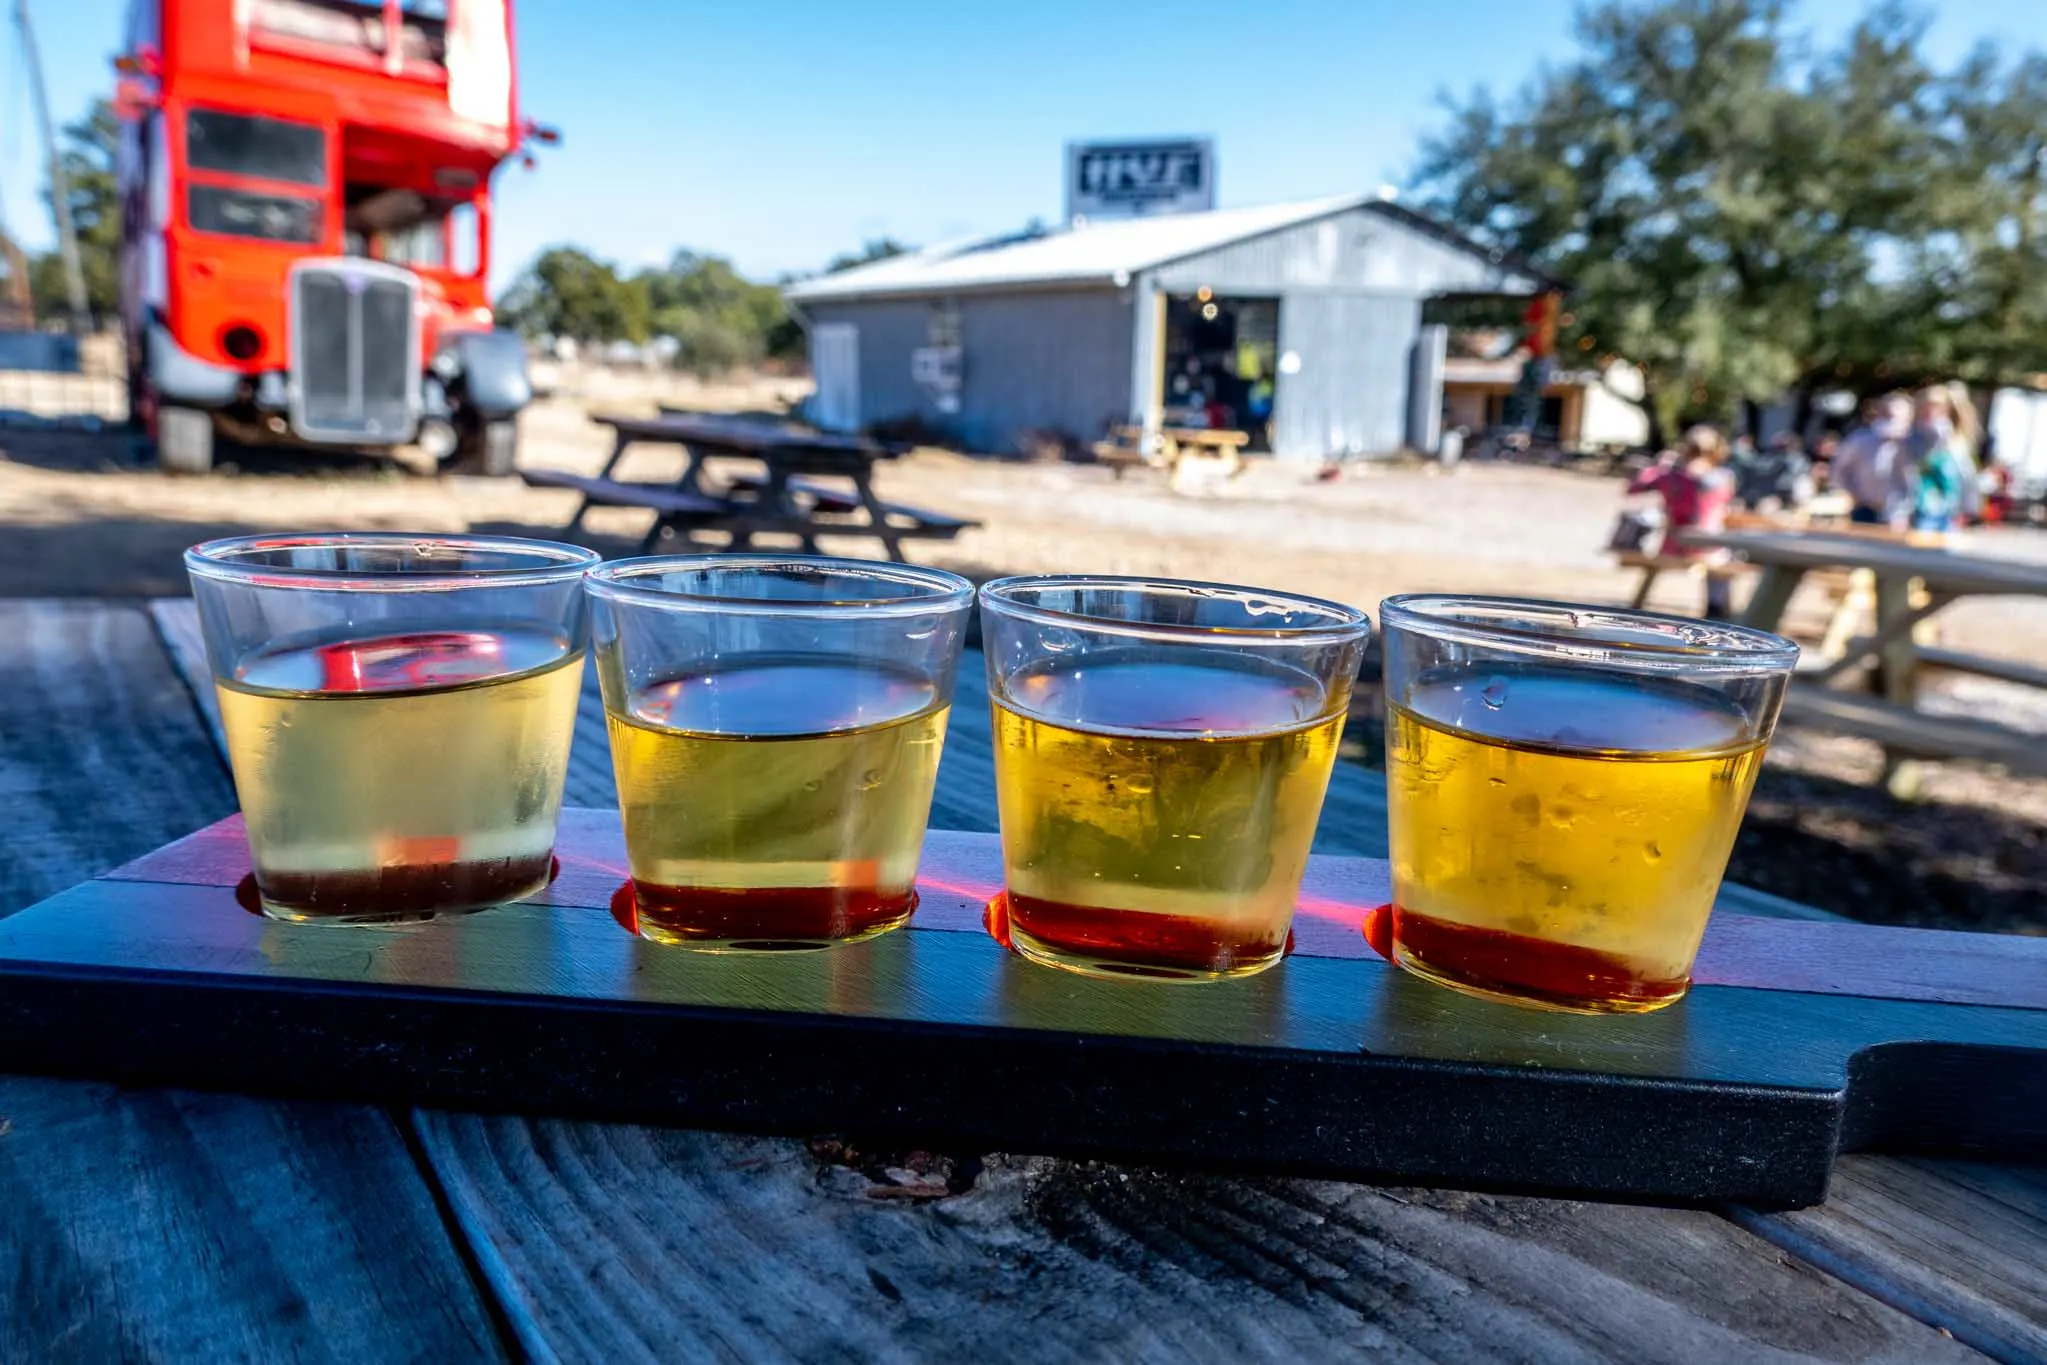 Flight of 4 glasses of cider on a picnic table. 